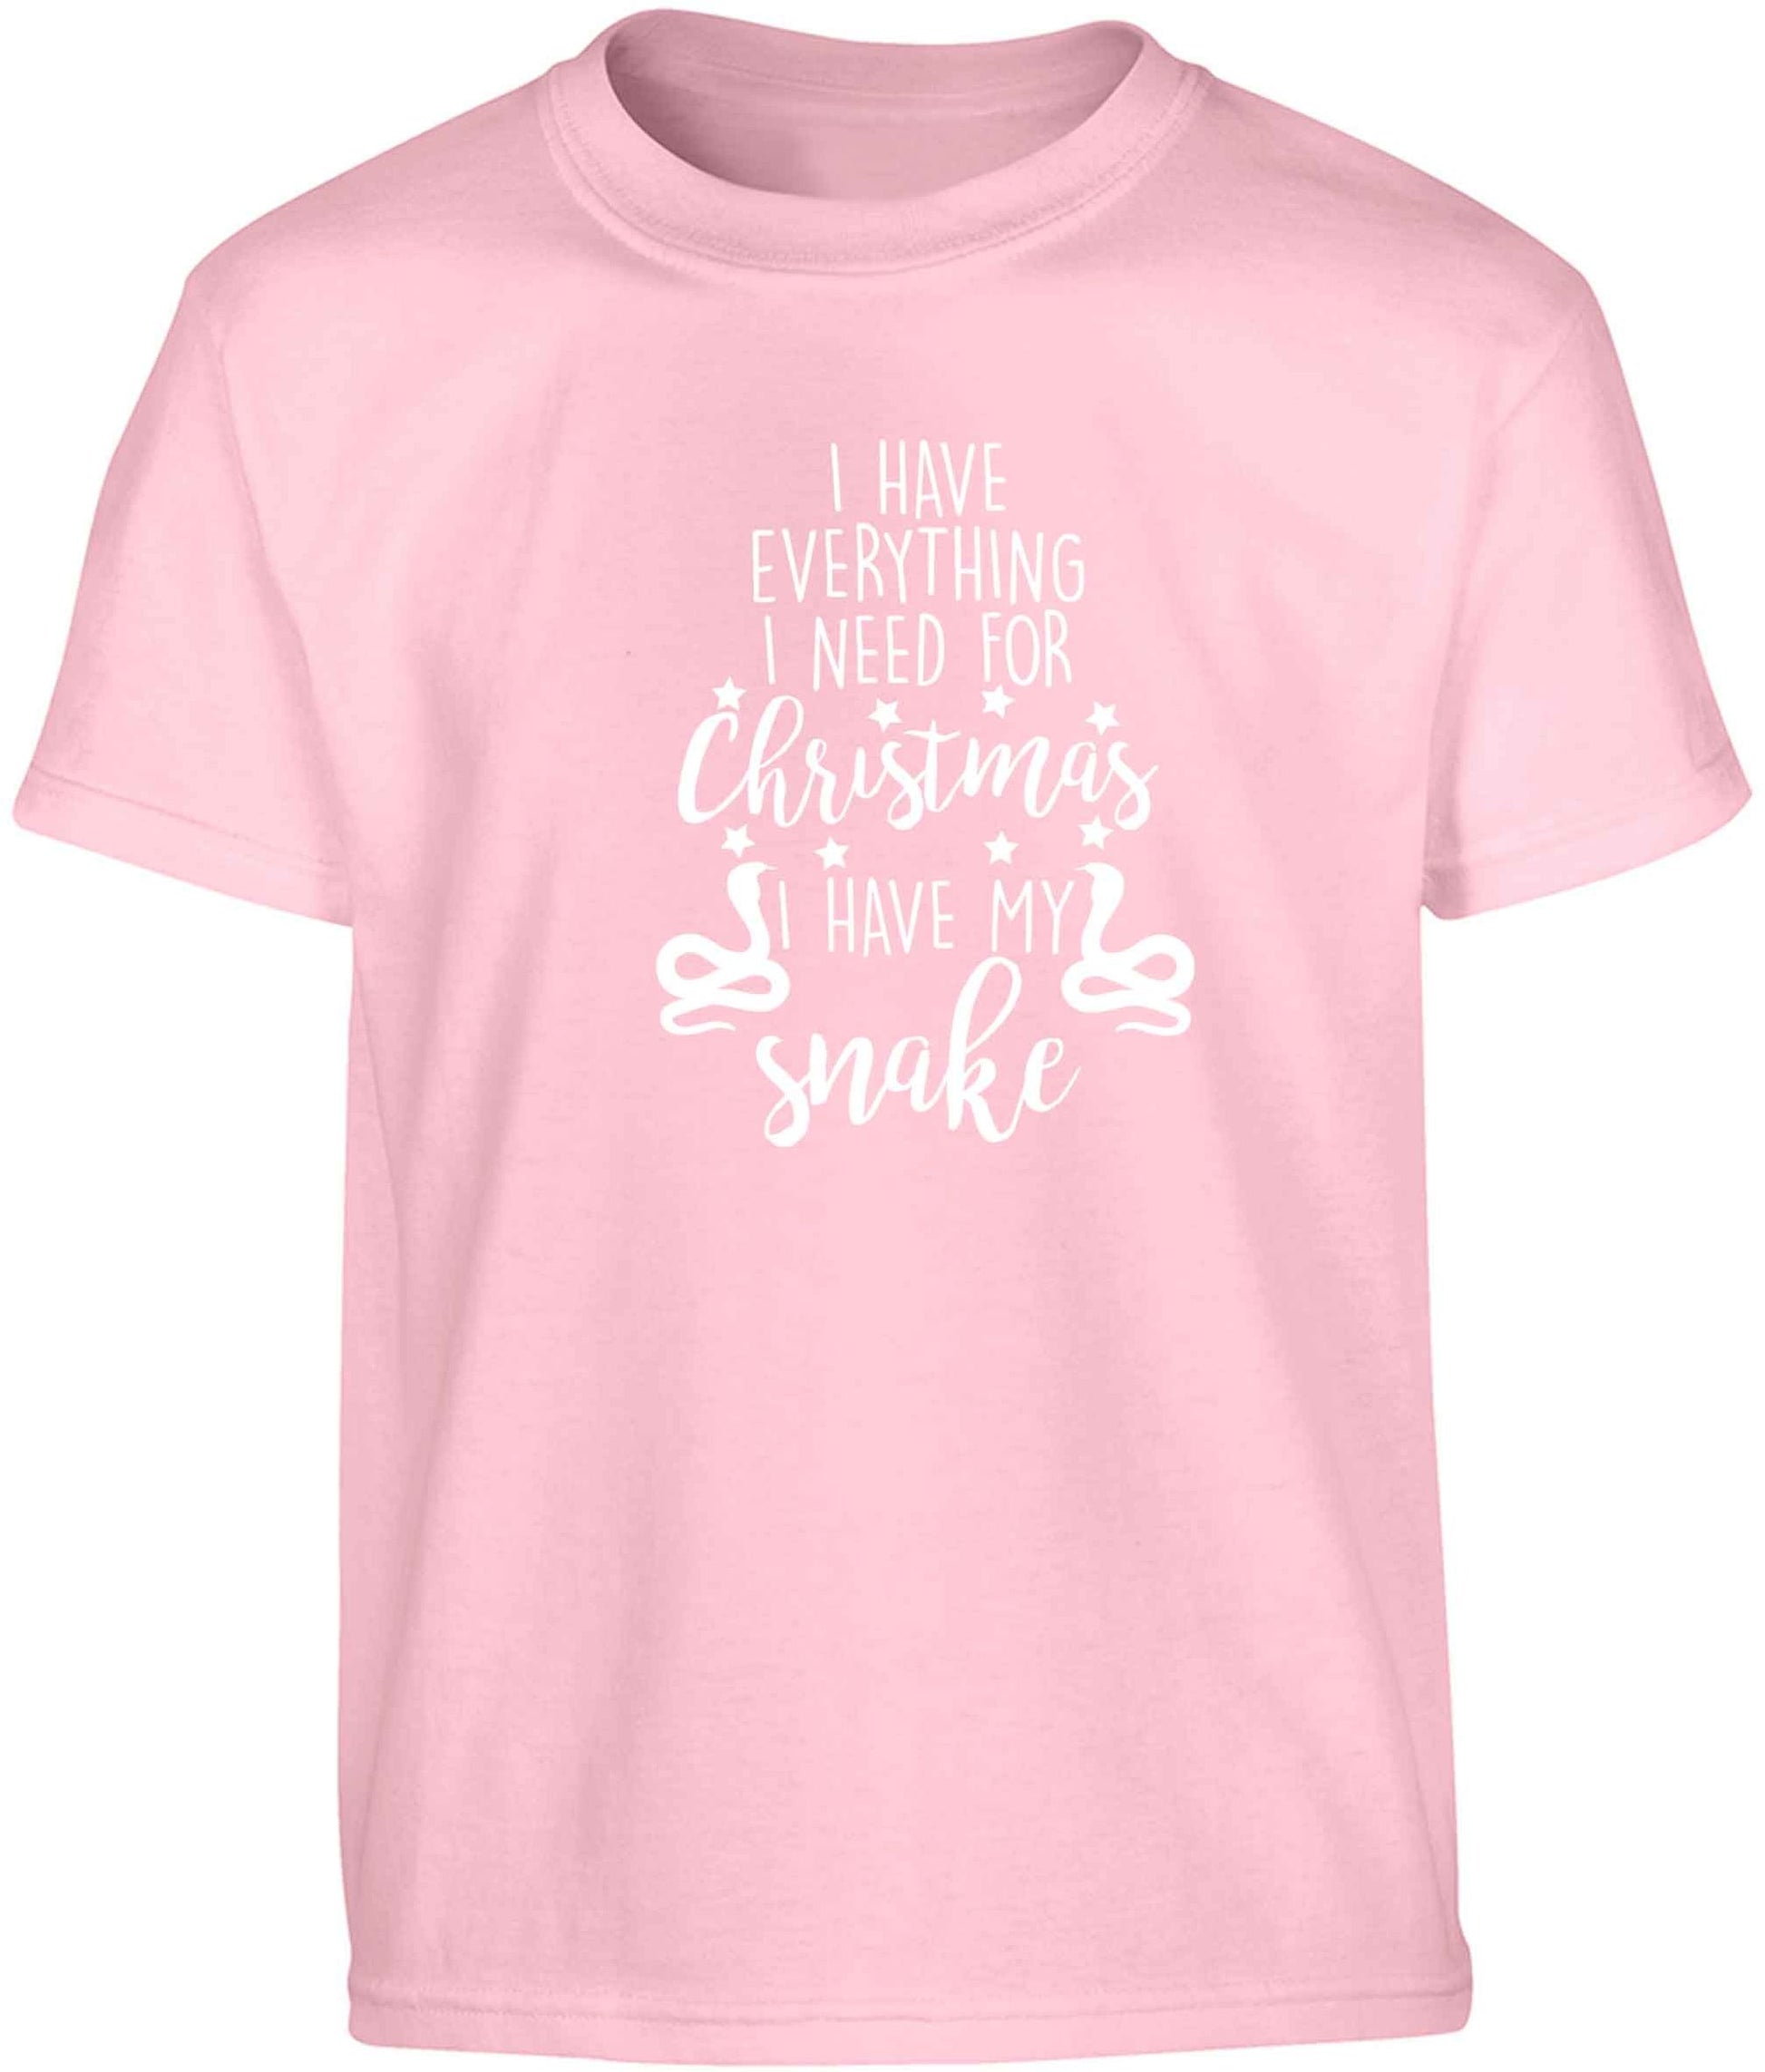 I have everything I need for Christmas I have my snake Children's light pink Tshirt 12-13 Years